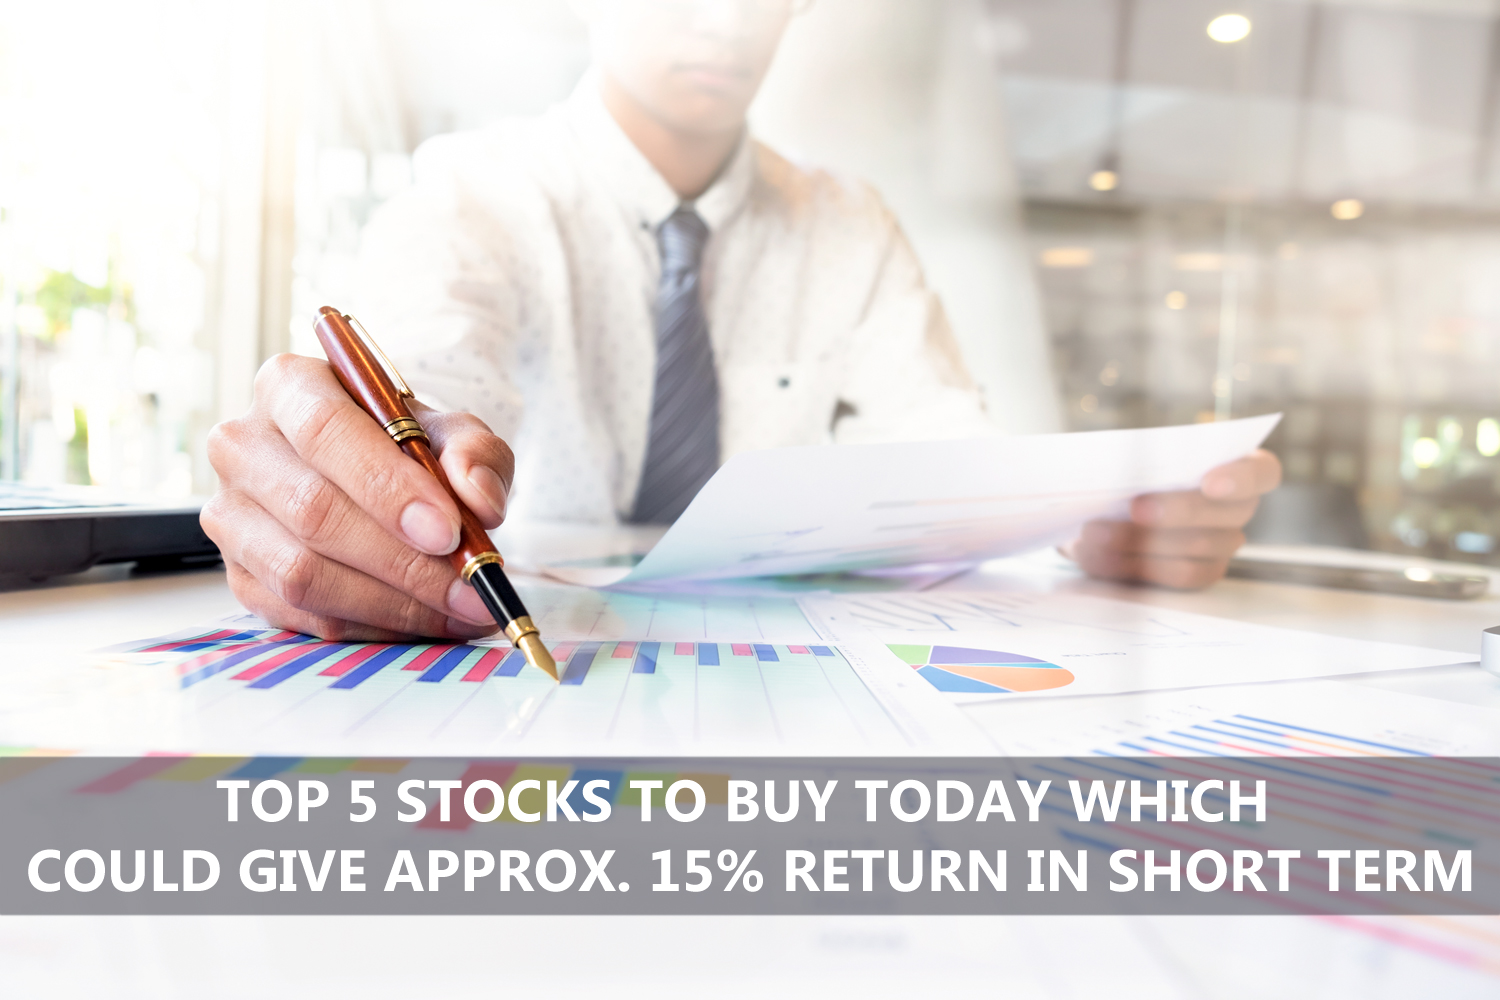 Top 5 Stocks to Buy Today Which Could Give Approx 15% Return in Short Term